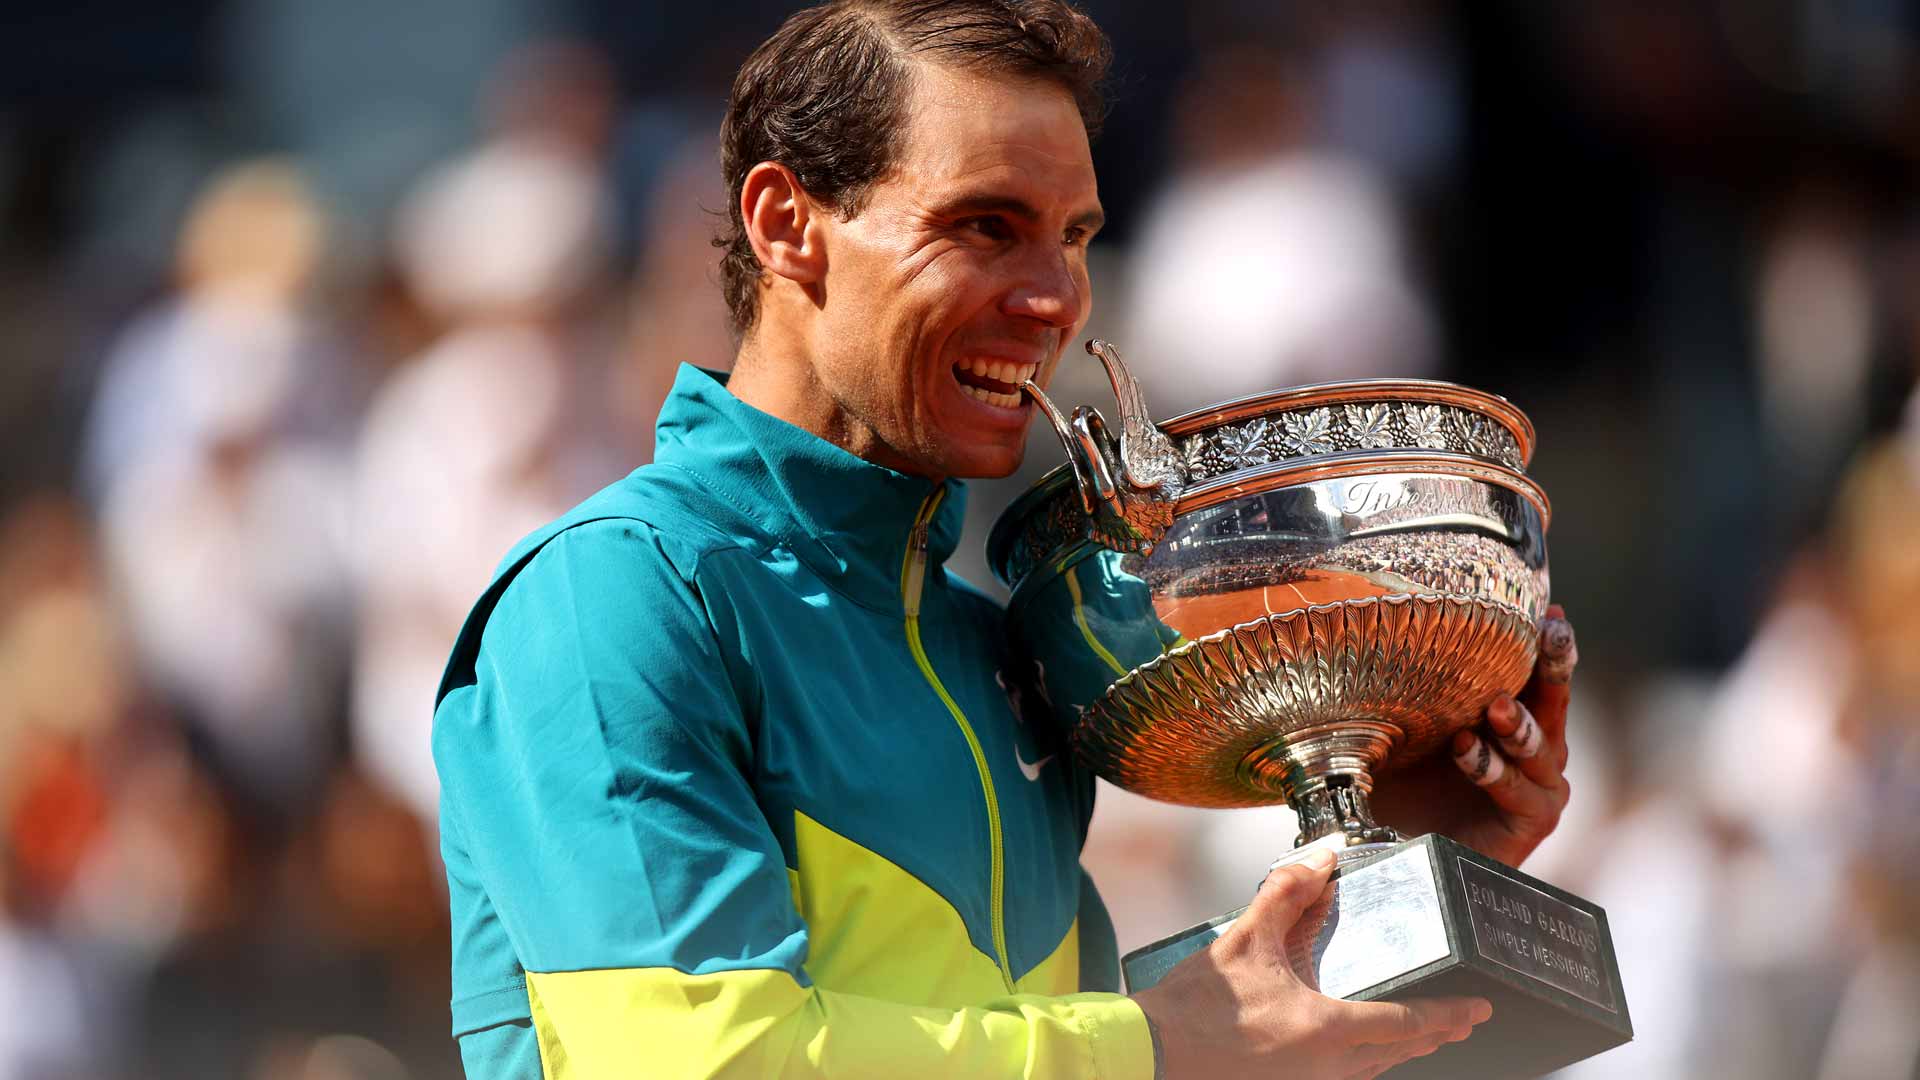 Rafael Nadal won his record-extending 14th Roland Garros title in his most recent appearance at the event in 2022.